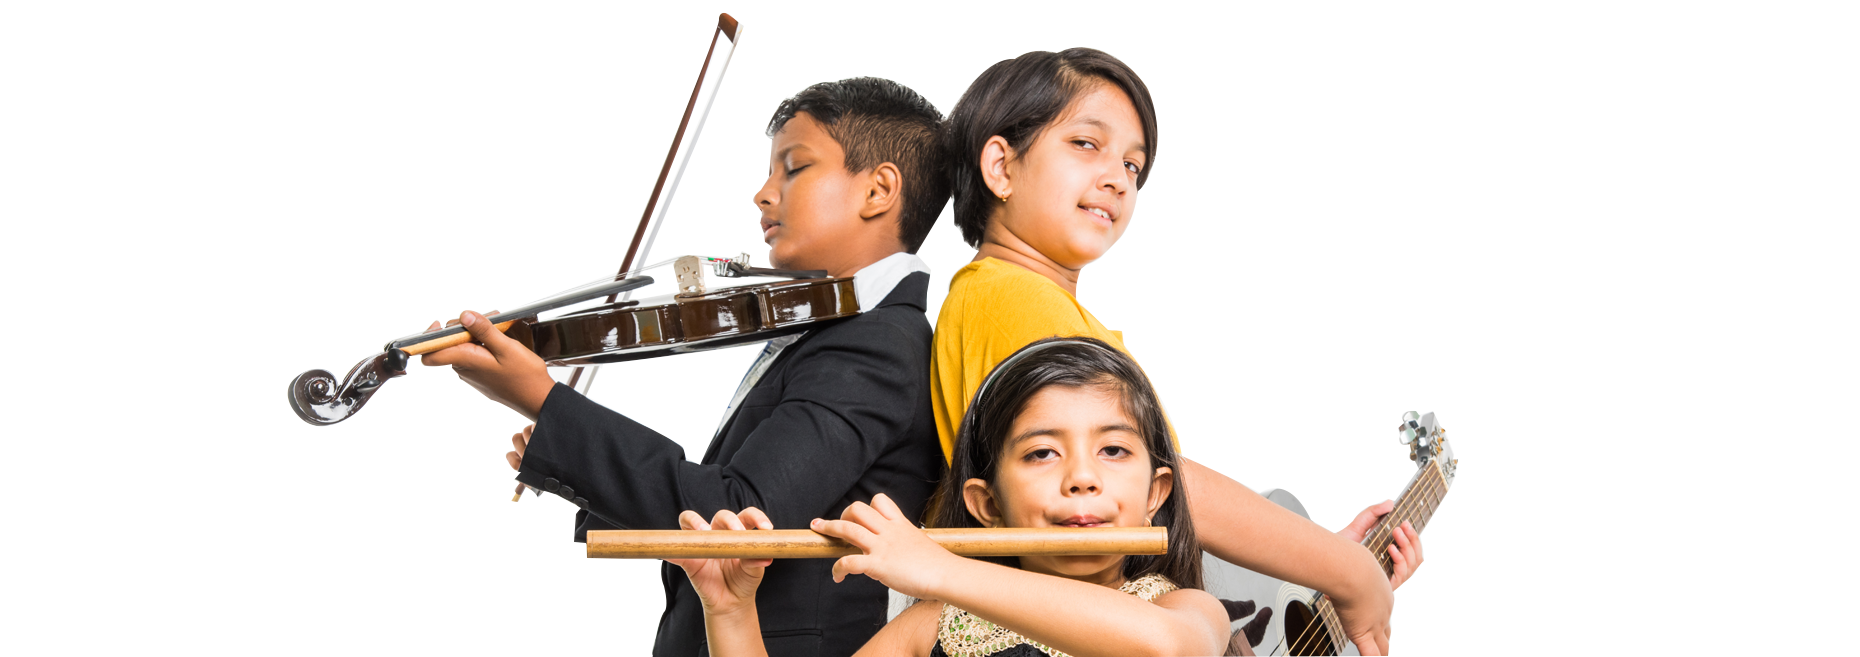 multicultural kids playing instruments